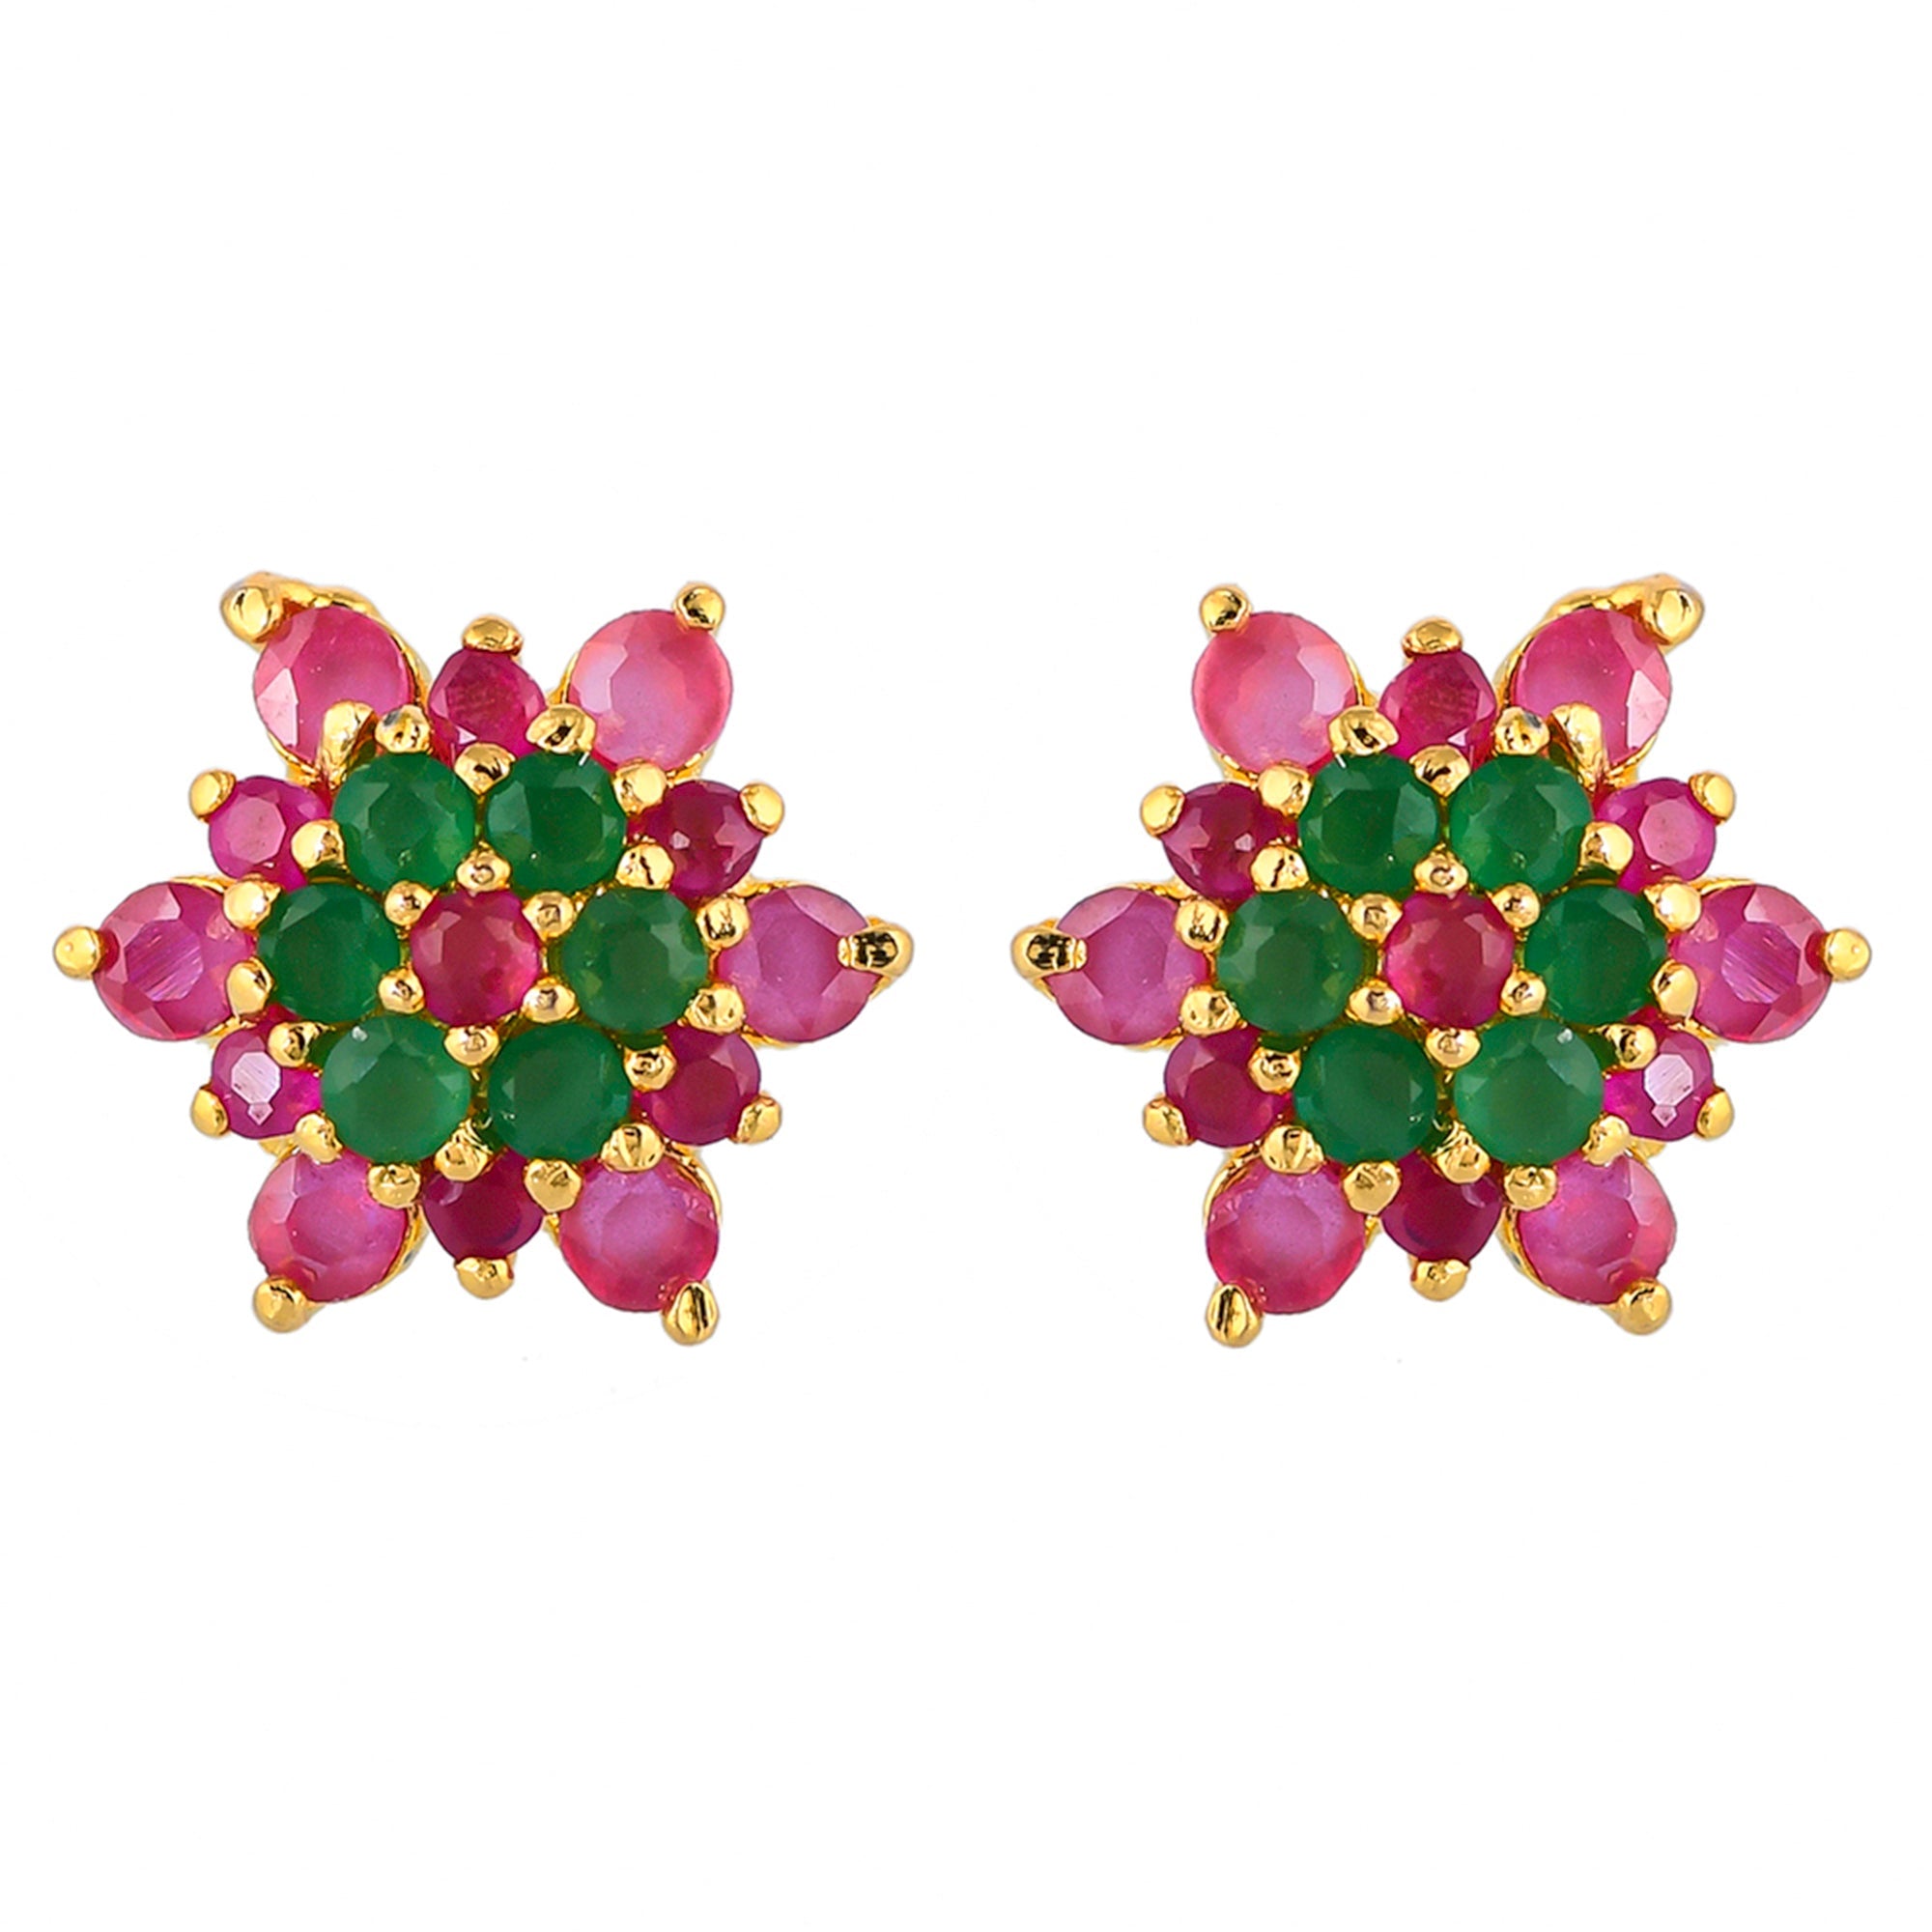 Women's Green And Pink Round Cut Cz Stud Earrings - Voylla